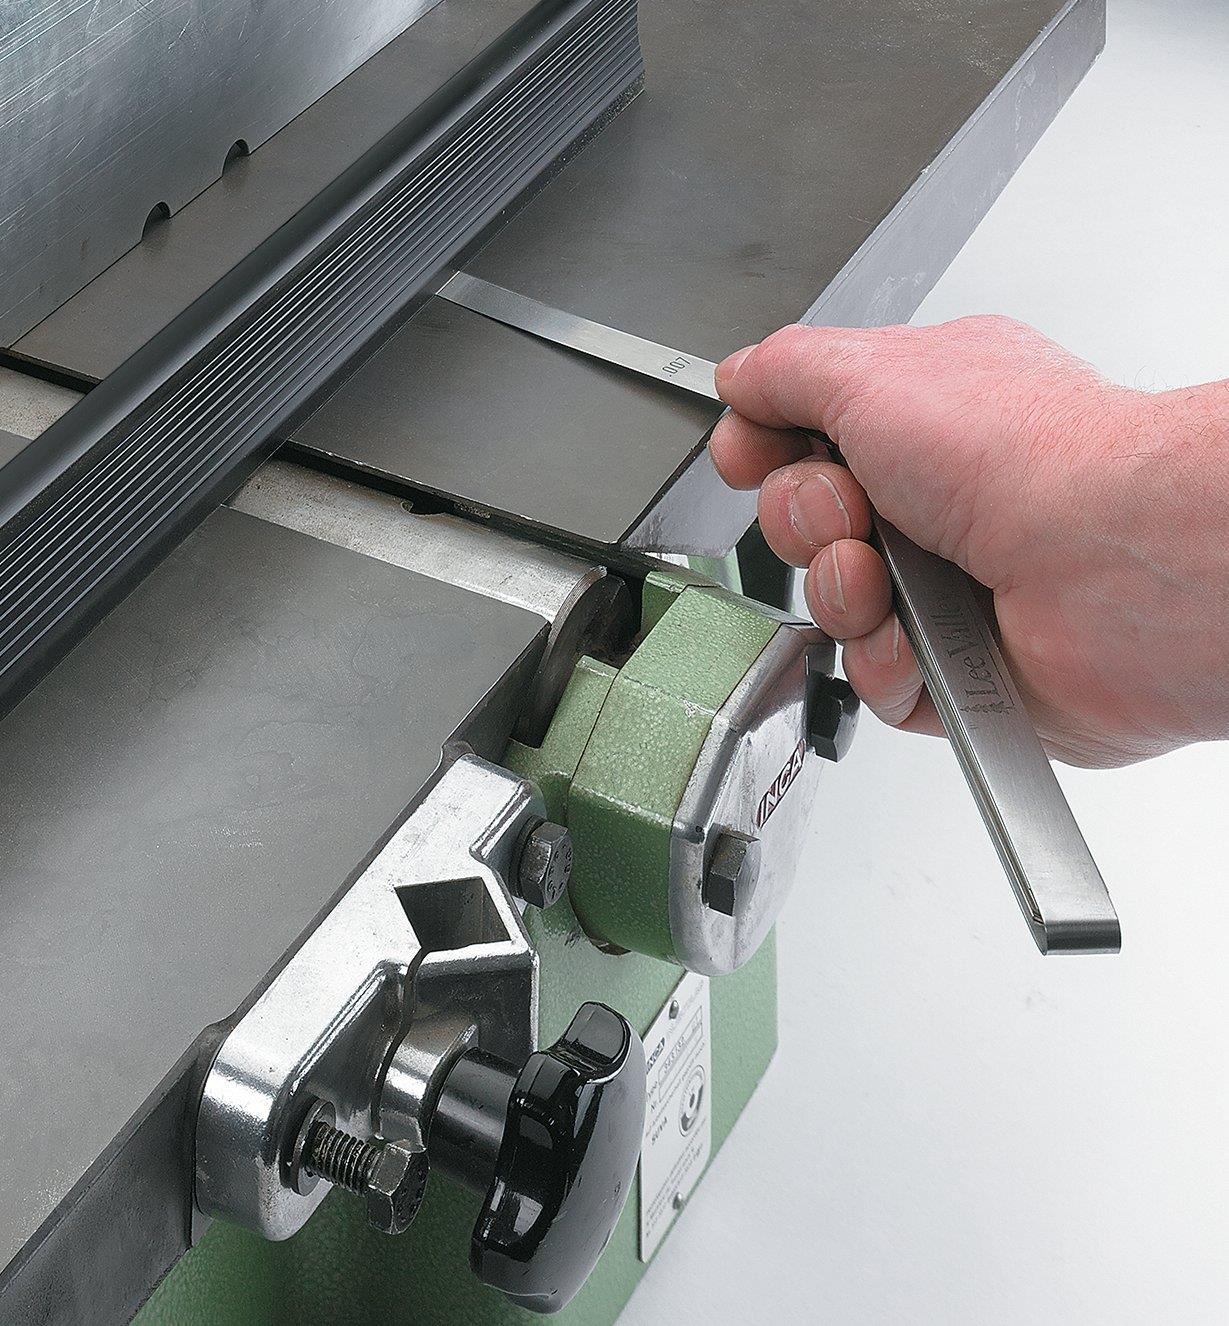 Using feeler gauges to check the infeed and outfeed surfaces are set up correctly on a surface planer